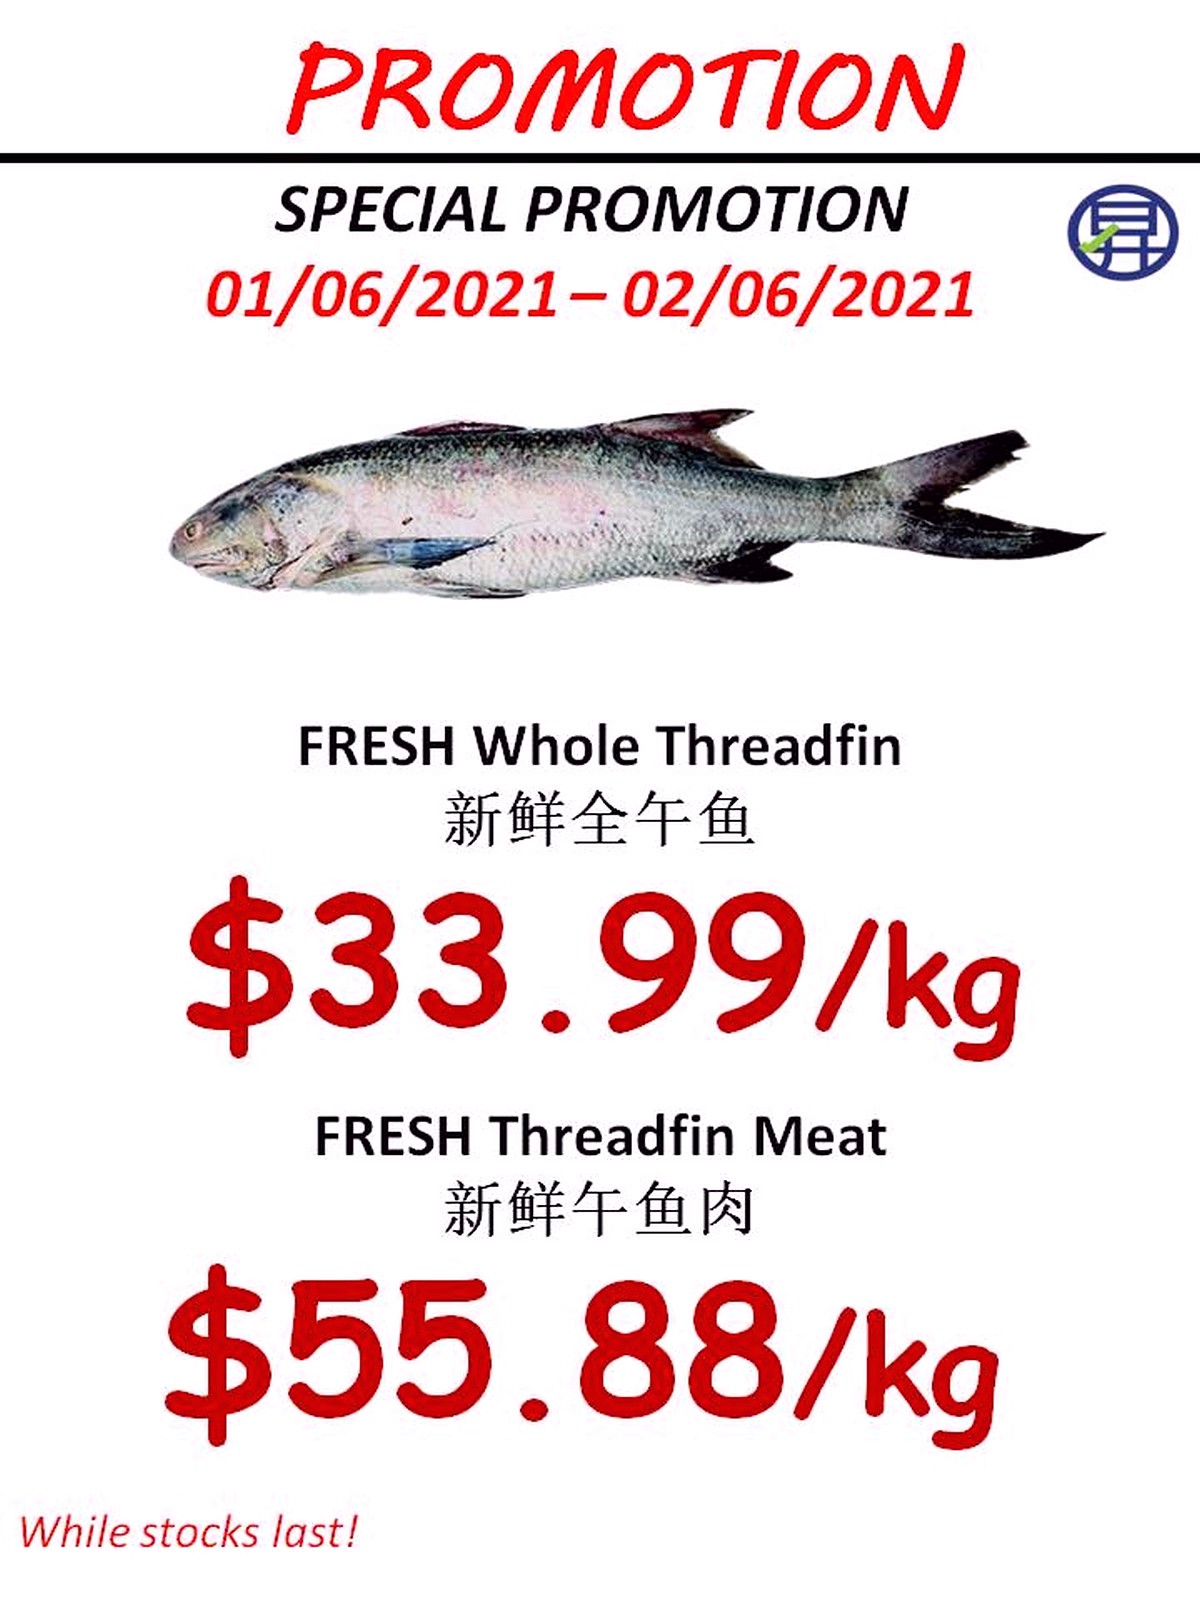 Sheng-Siong-Today-Fresh-Fish-Seafood-Promotion-2021-Singapore-001 Now till 17 Jun  2021: Sheng Siong Mega Promotion! 2 Fresh Seabass for $9.88 only